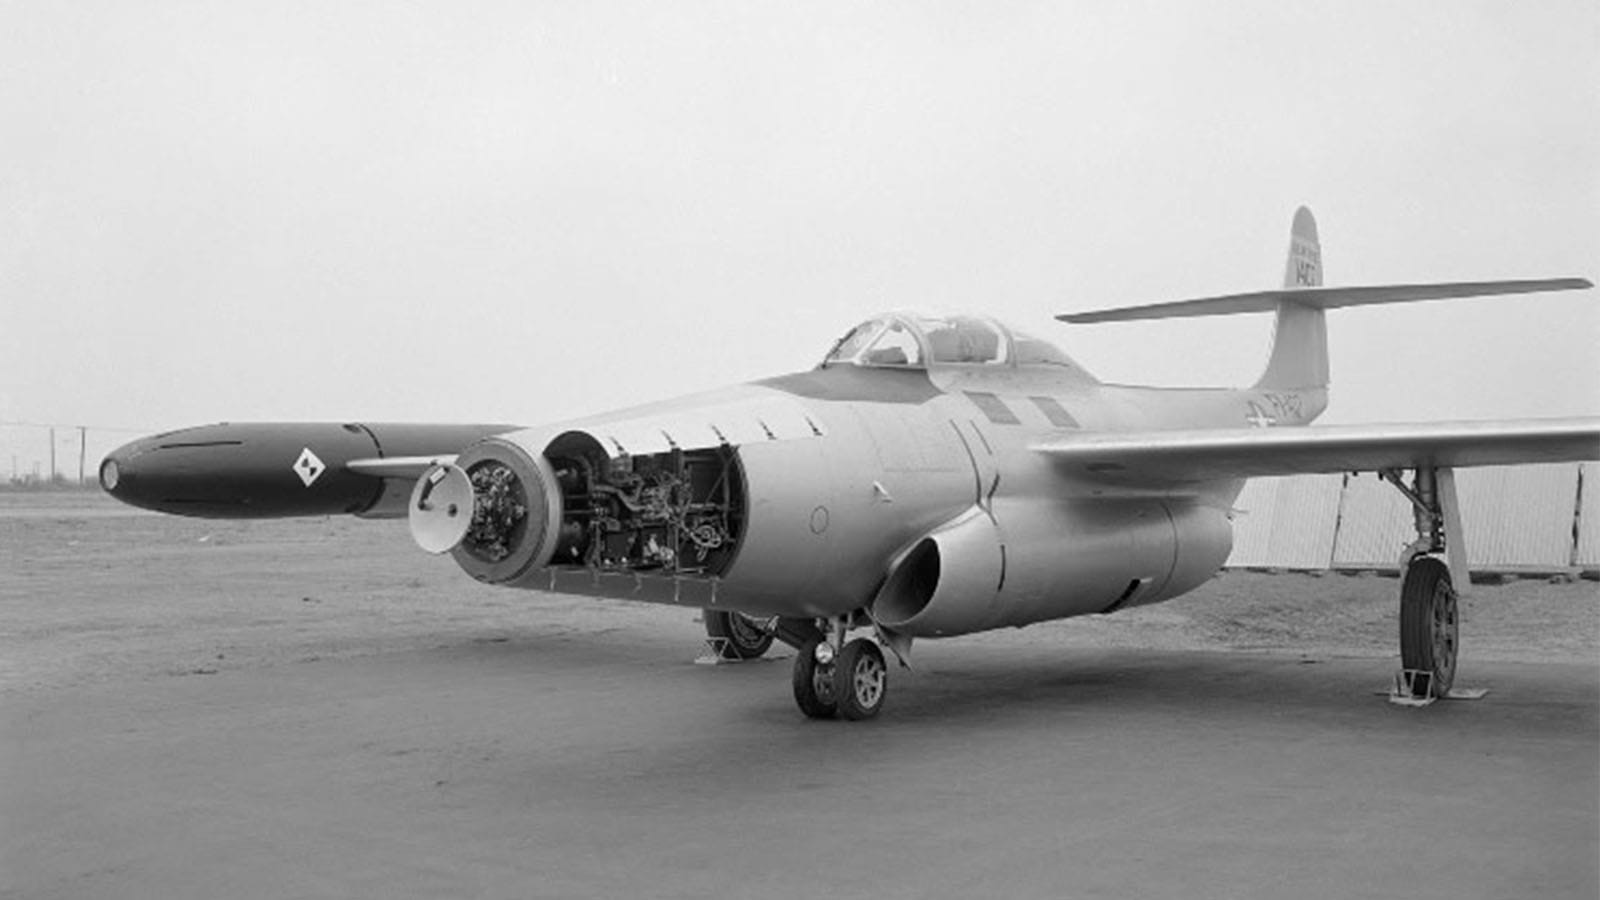 A Northrop F-89D Scorpion displaying the Hughes E-6 Fire Control System.